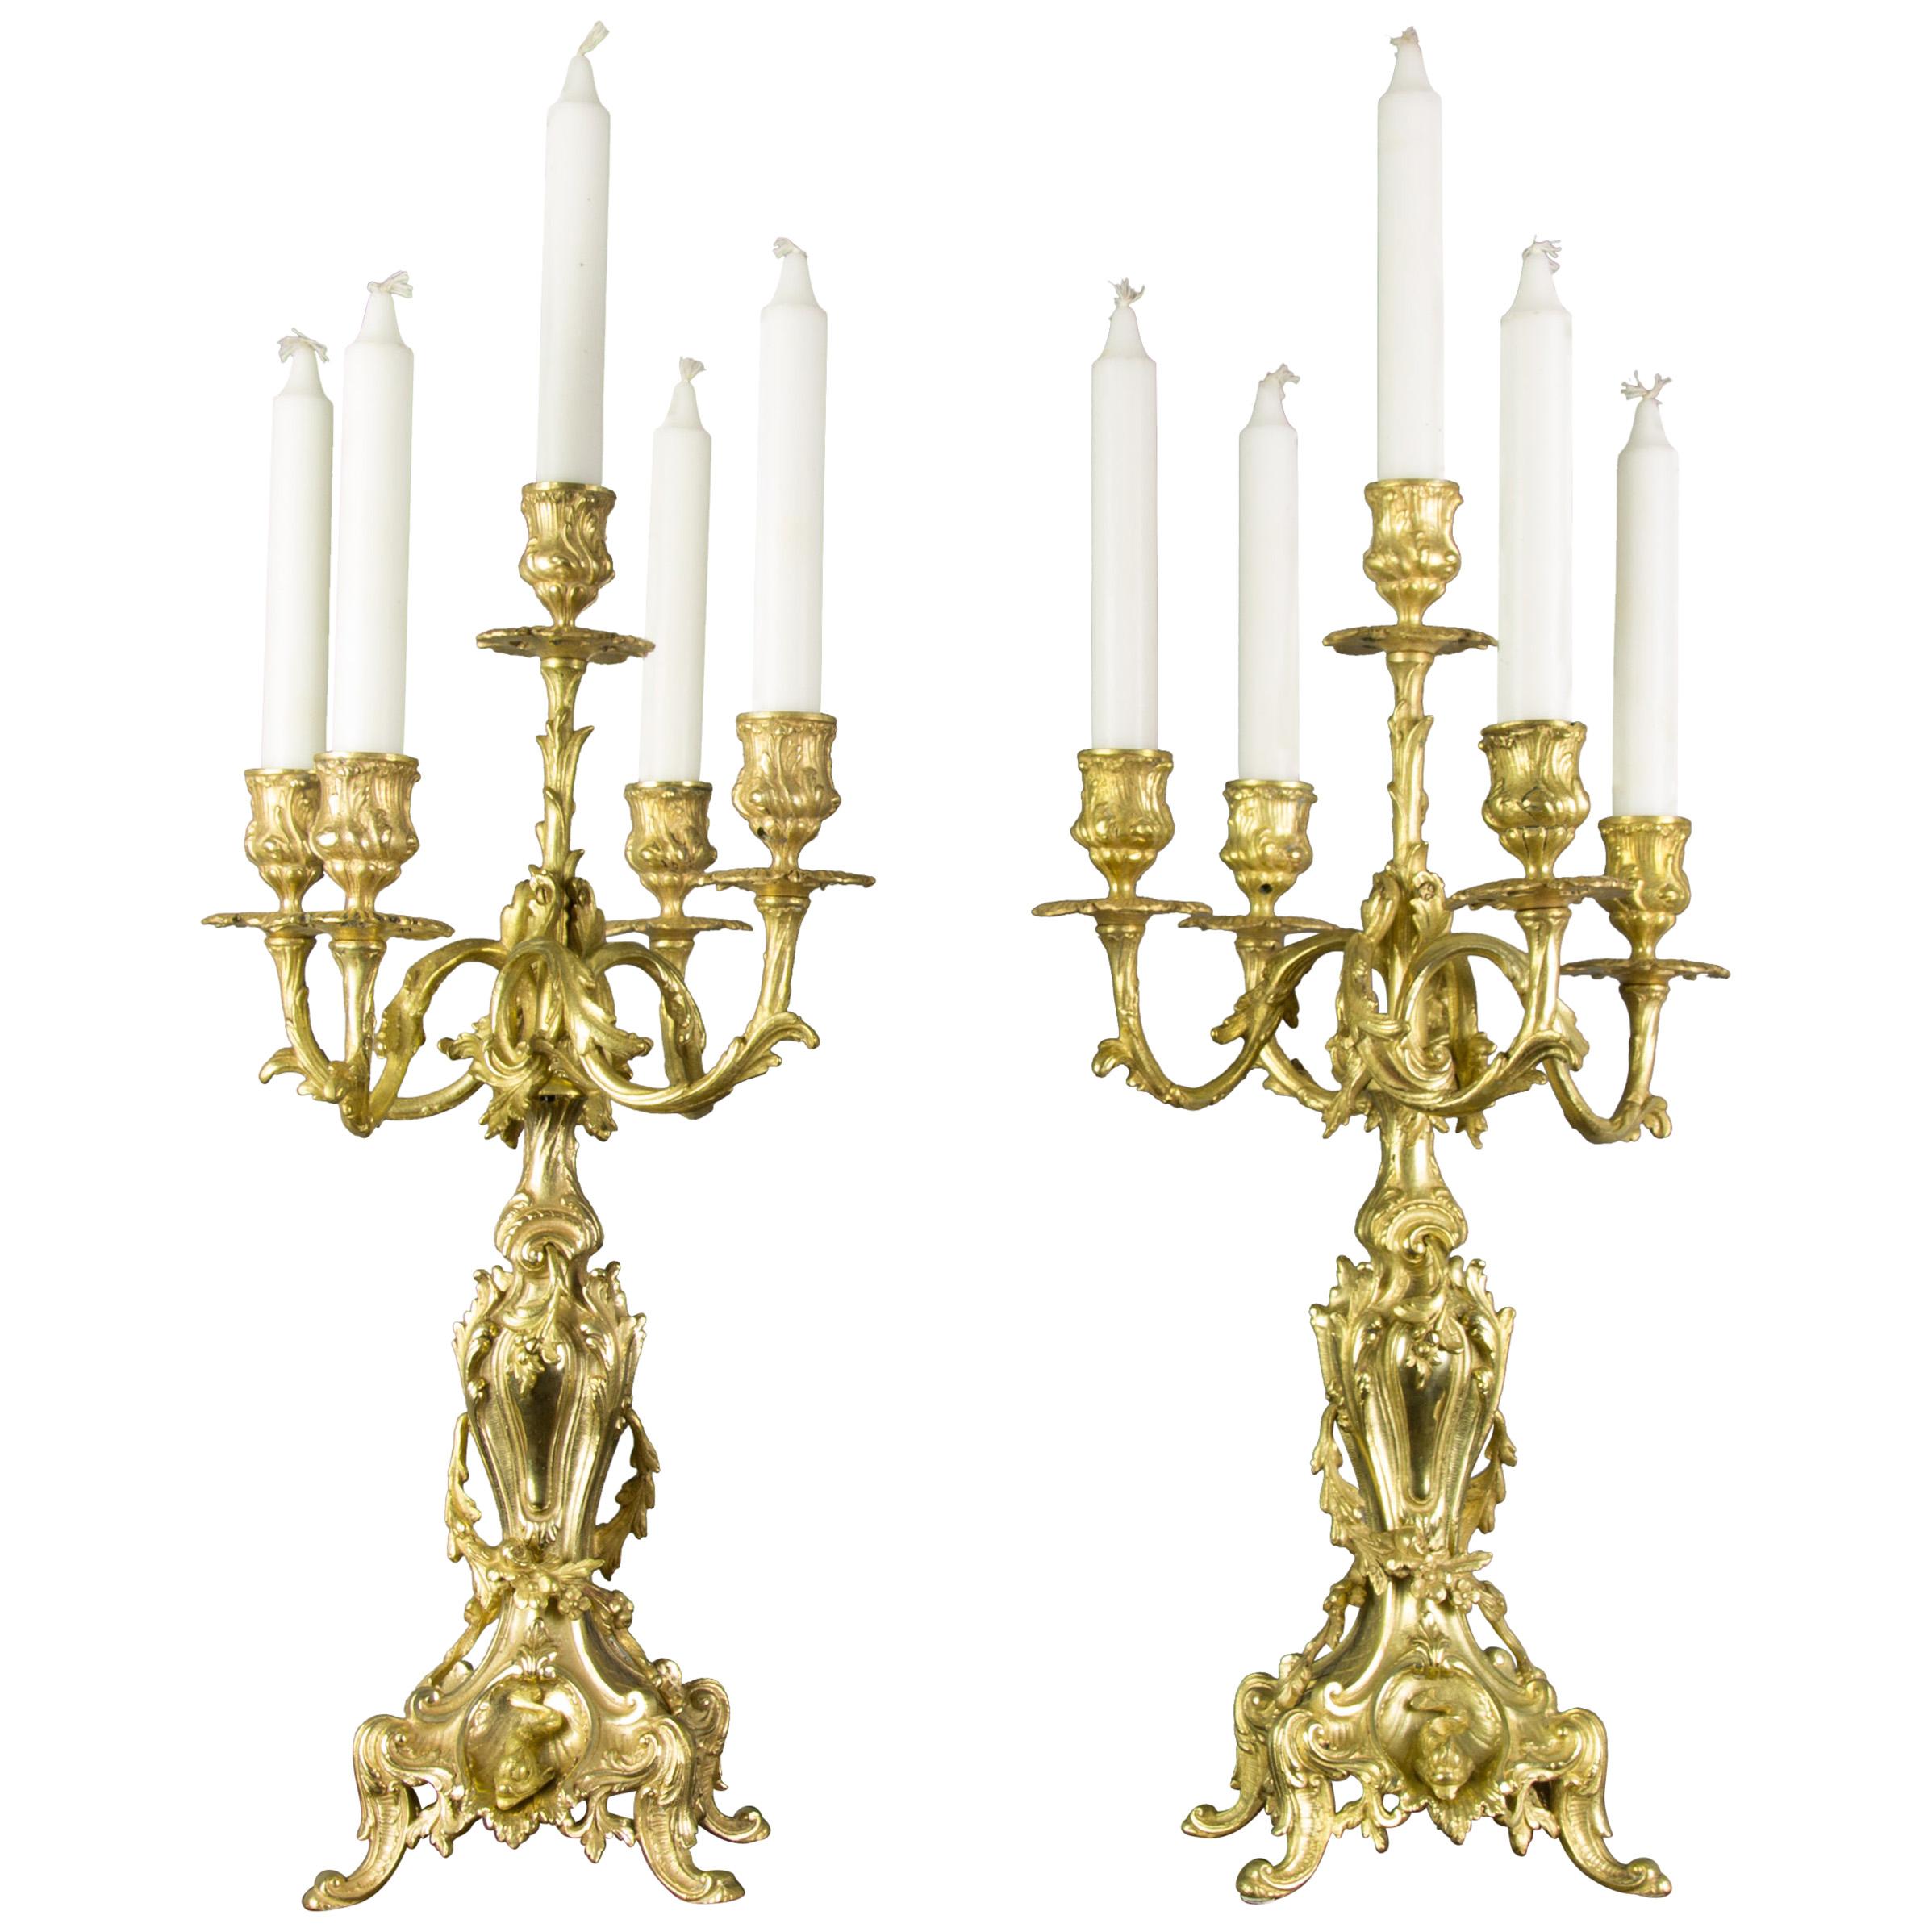 French Louis XV or Rococo Style French Bronze Candelabras with Dolphins, a Pair